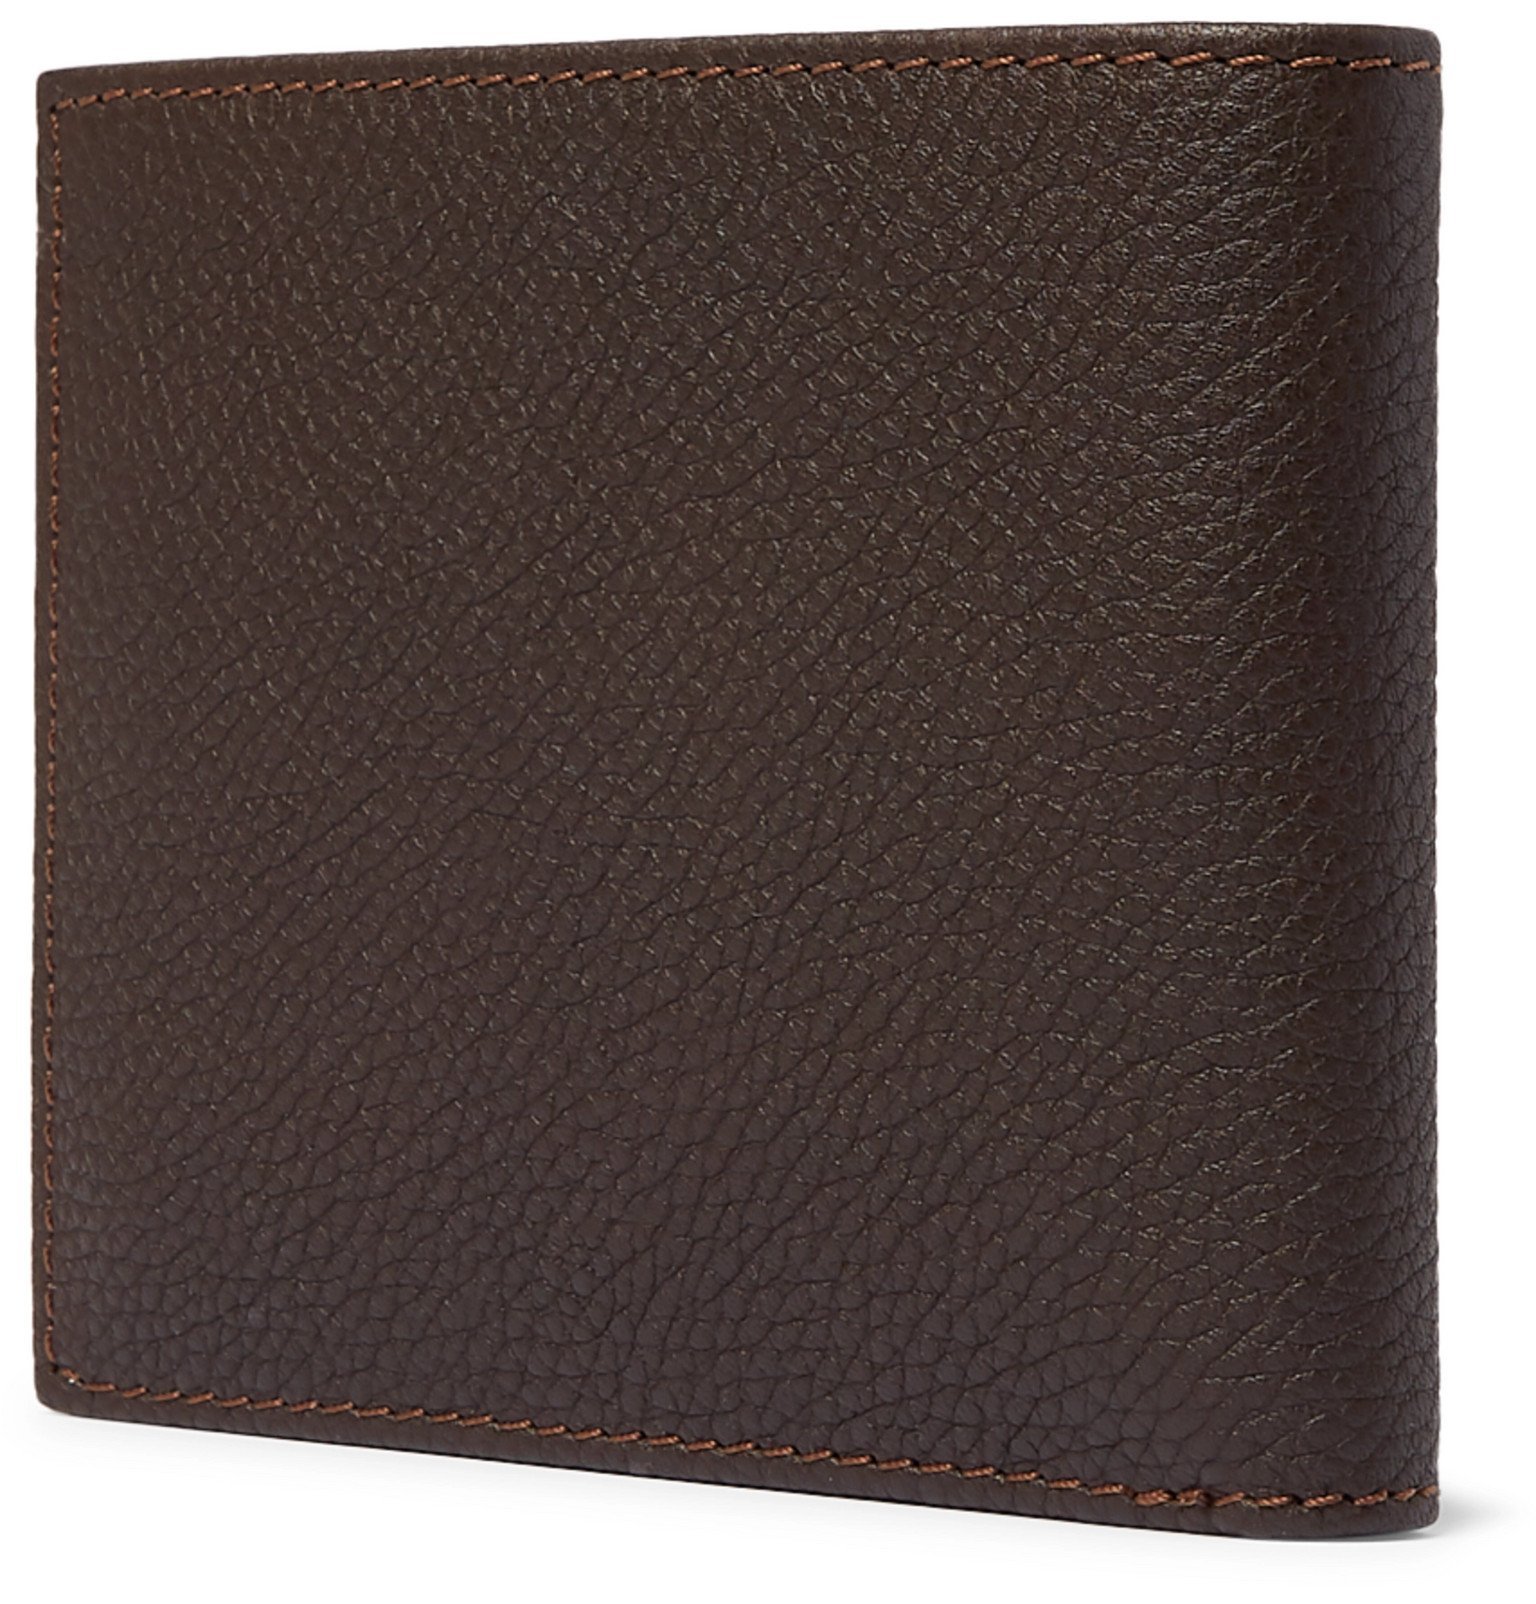 Anderson's - Full-Grain Leather Billfold Wallet - Brown Anderson's